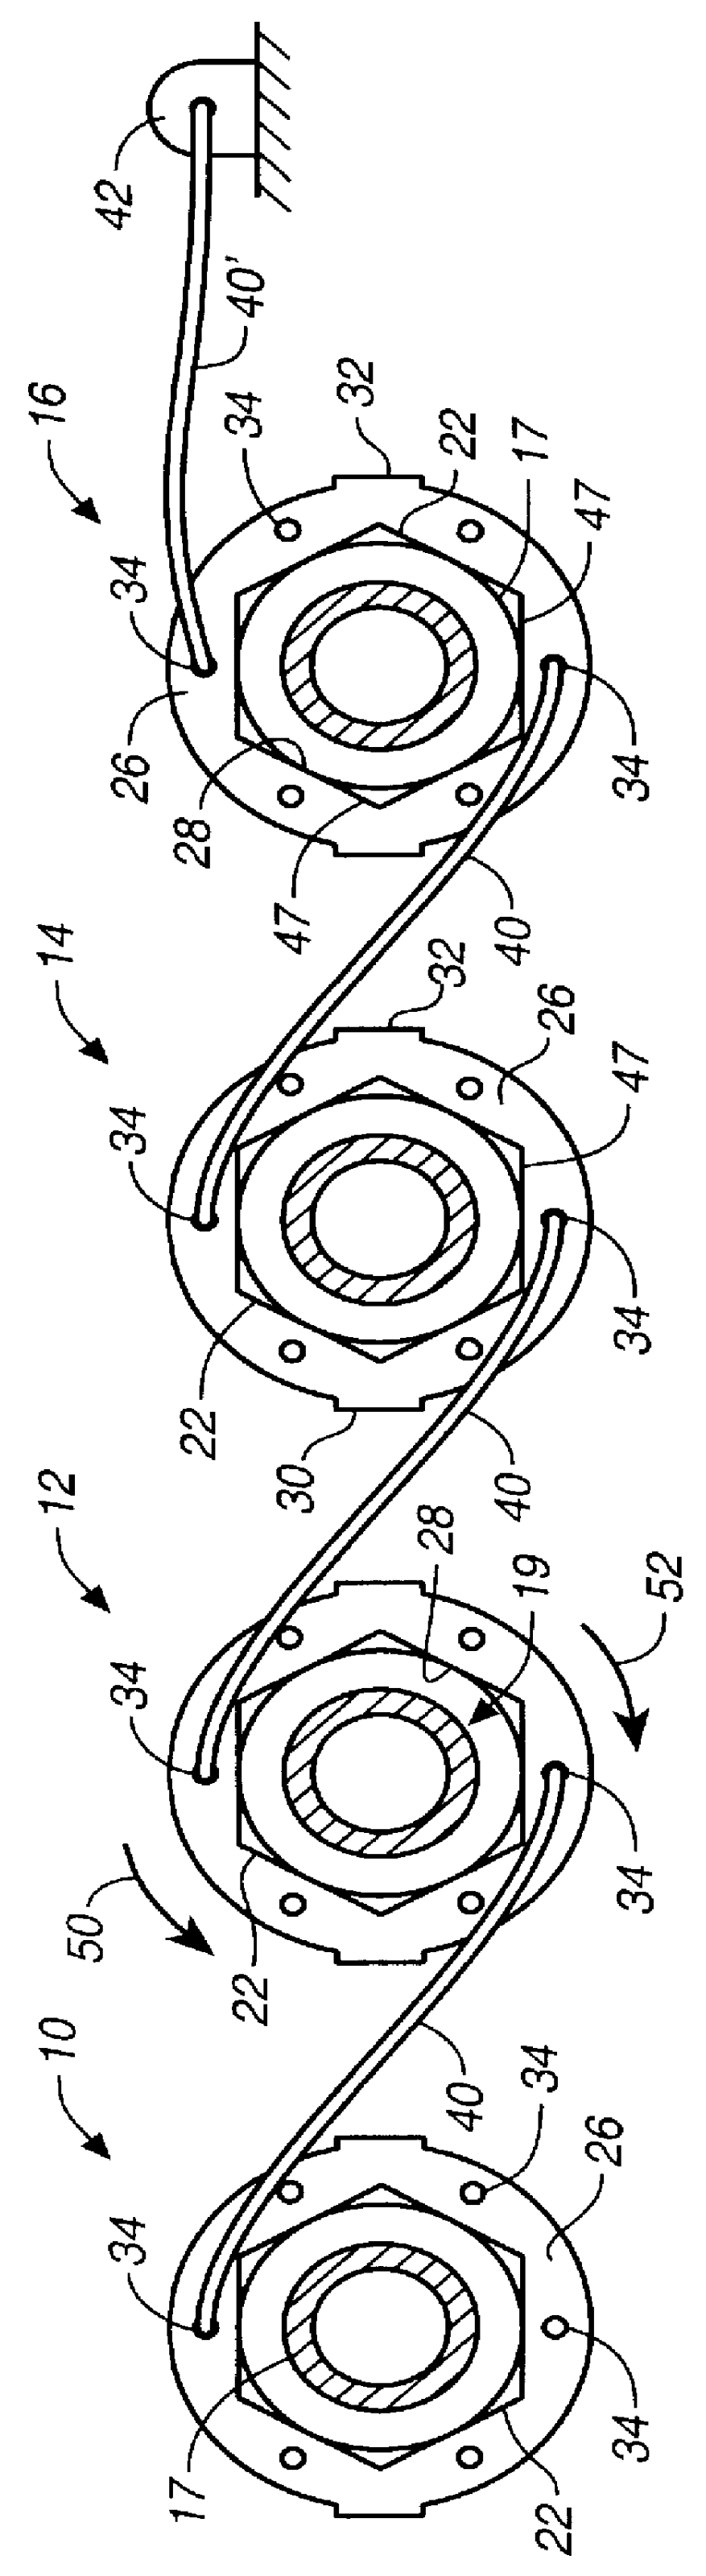 Safety collar and tendon assembly for threaded connections